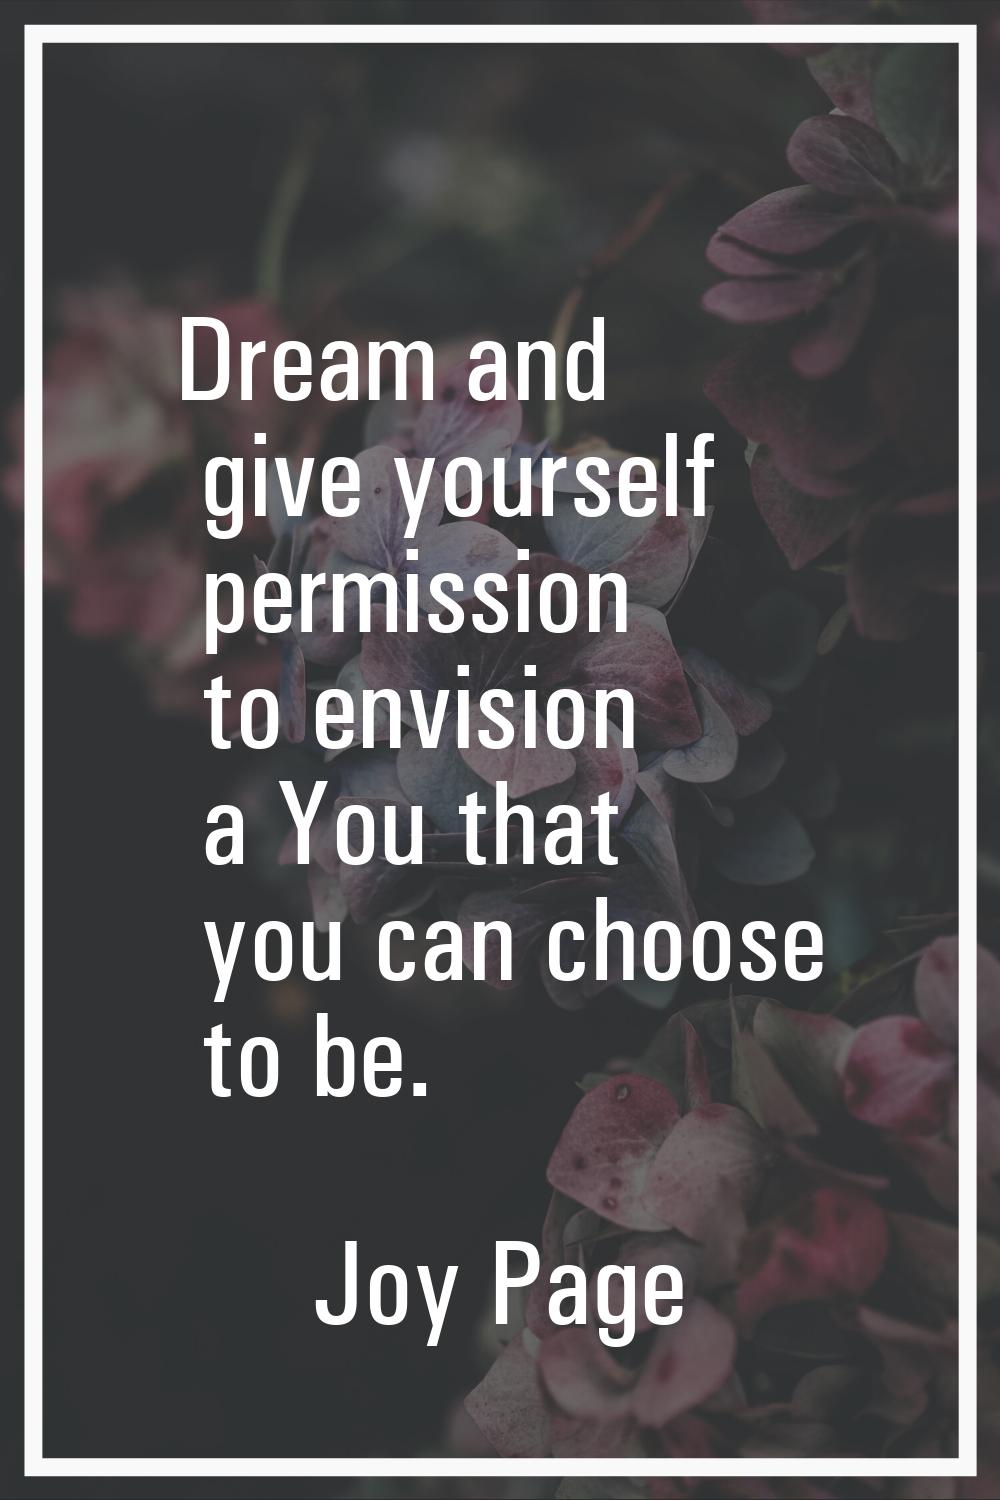 Dream and give yourself permission to envision a You that you can choose to be.